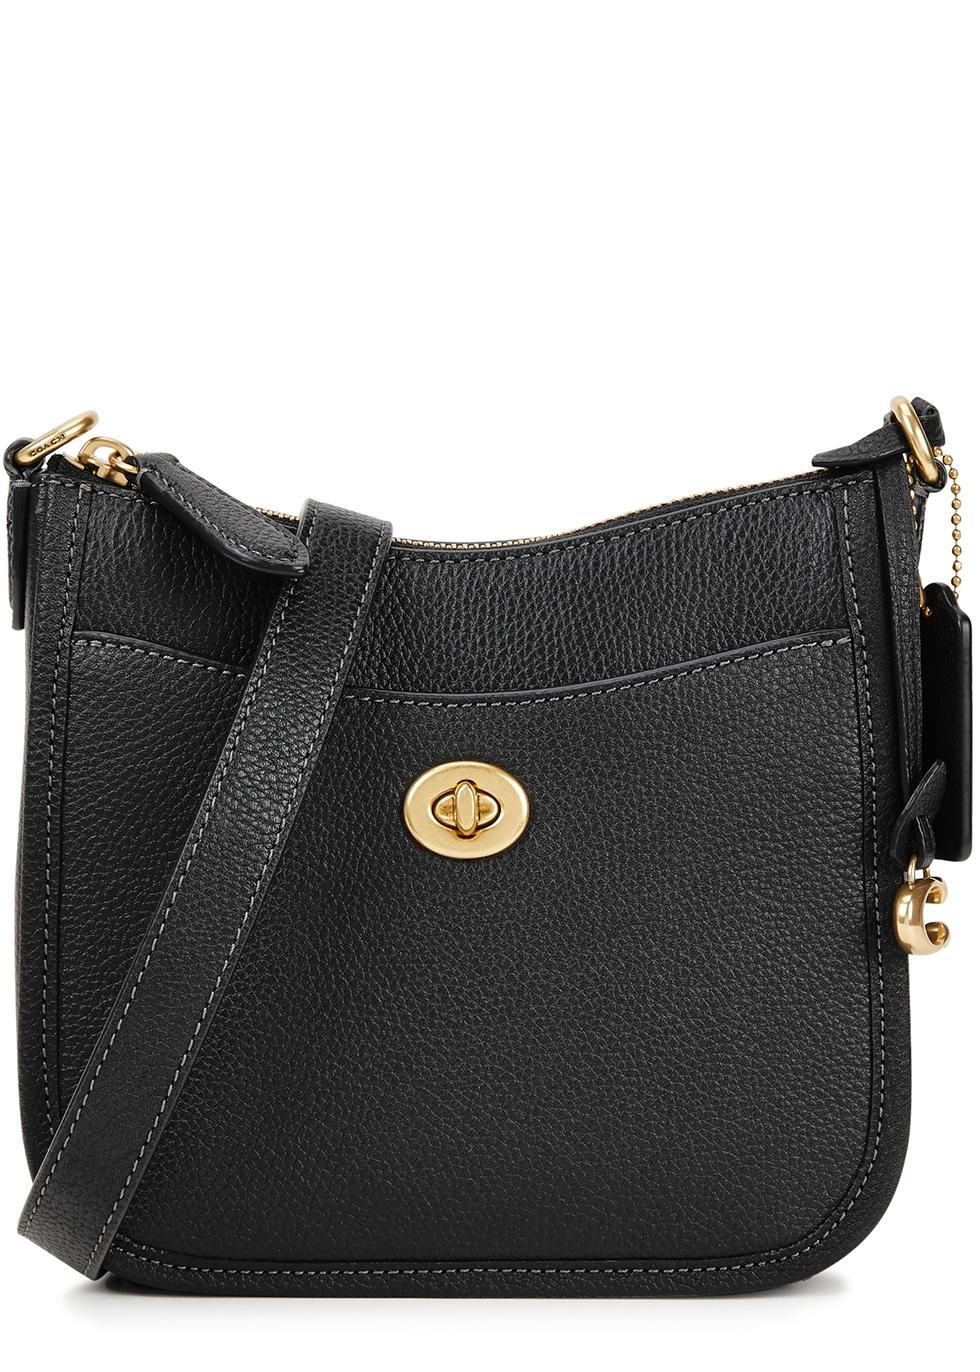 COACH Chaise 19 Leather Cross-body Bag in Black | Lyst